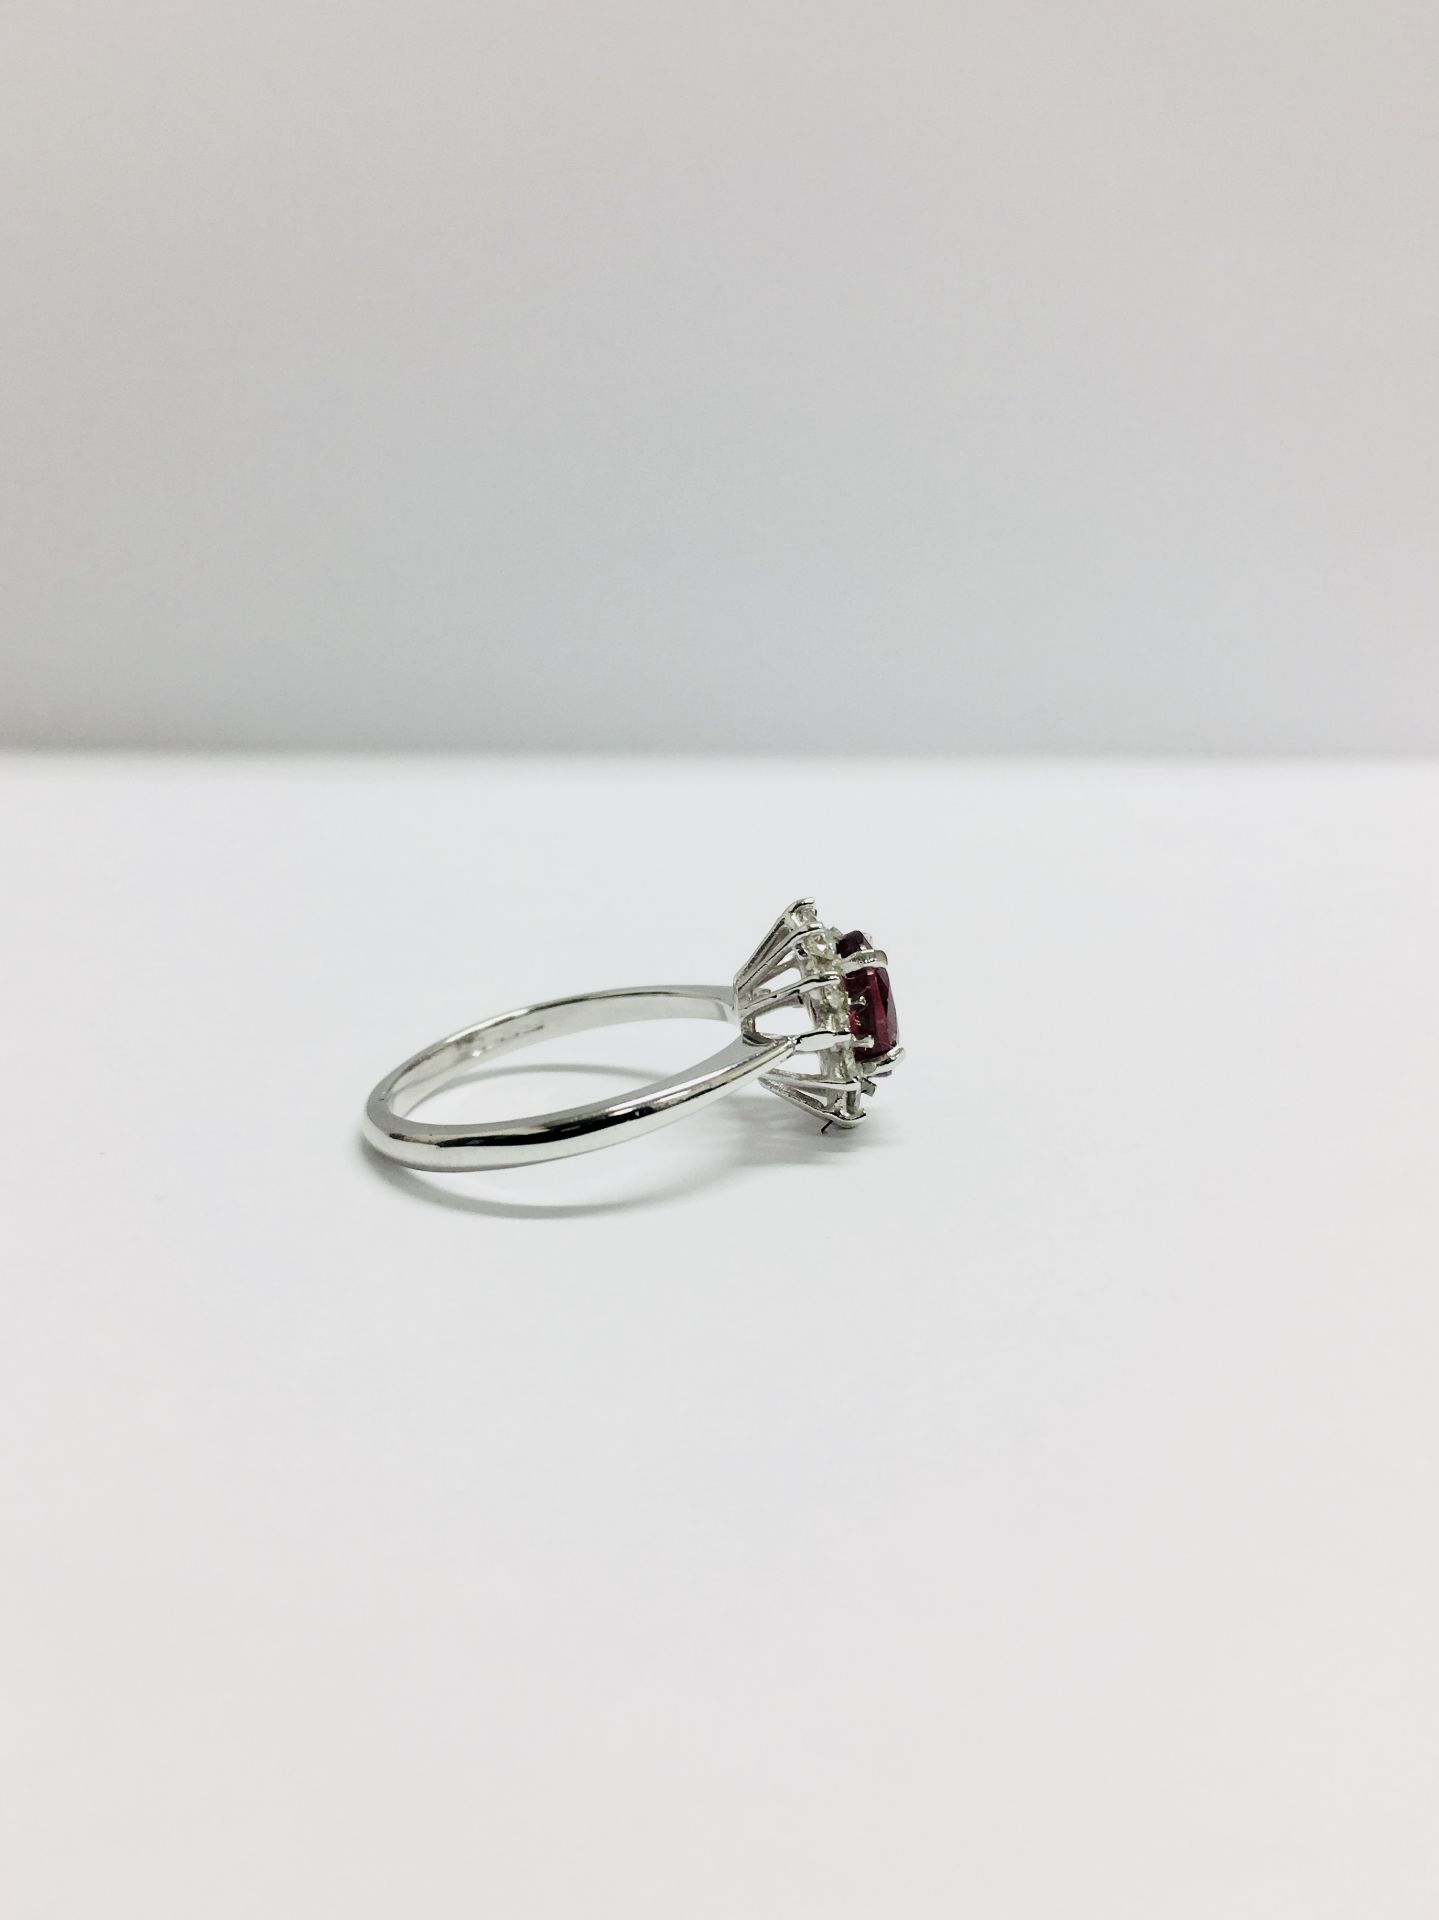 0.80ct Ruby and diamond cluster ring set with a oval cut(glass filled) ruby which is surrounded by - Image 4 of 5